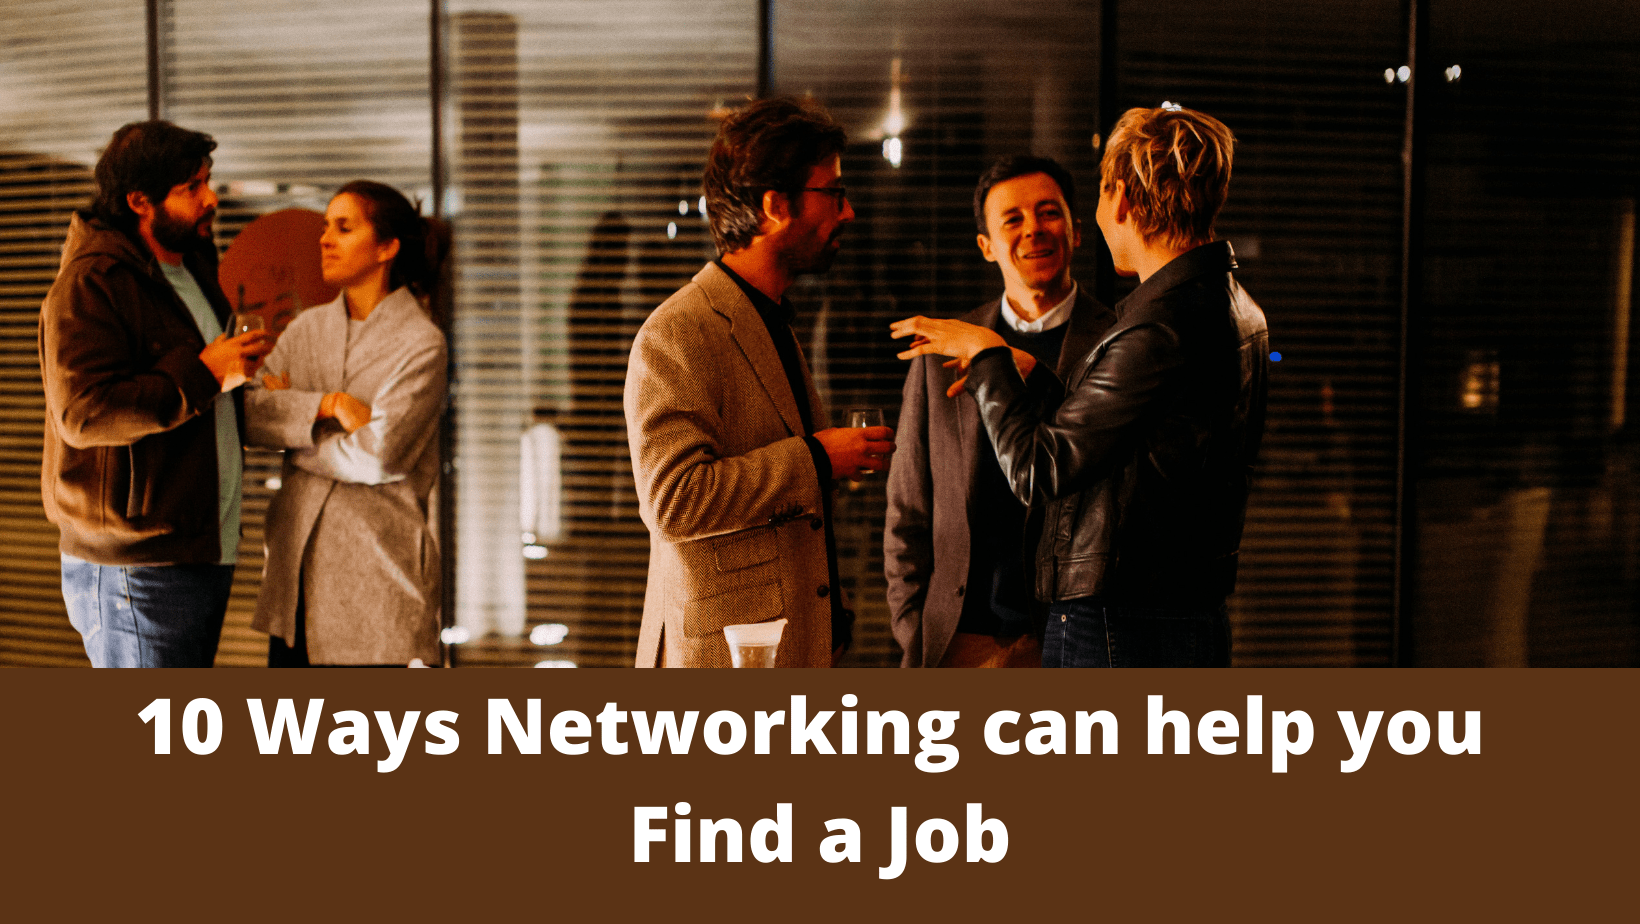 A blog on Human Networking